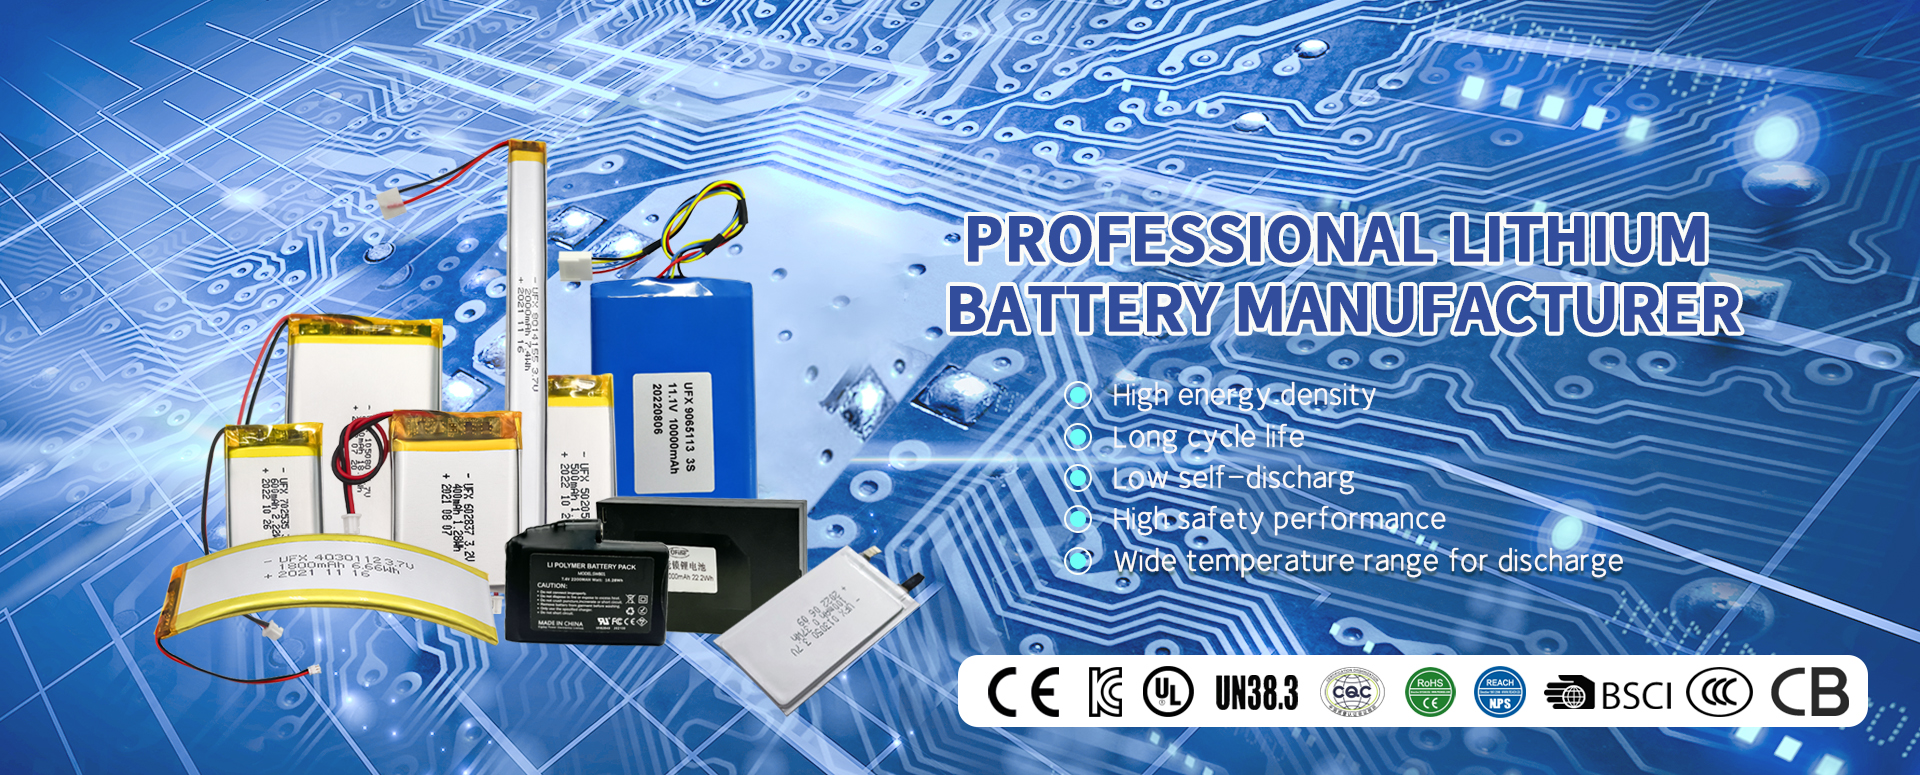 professional lithium battery manufacture